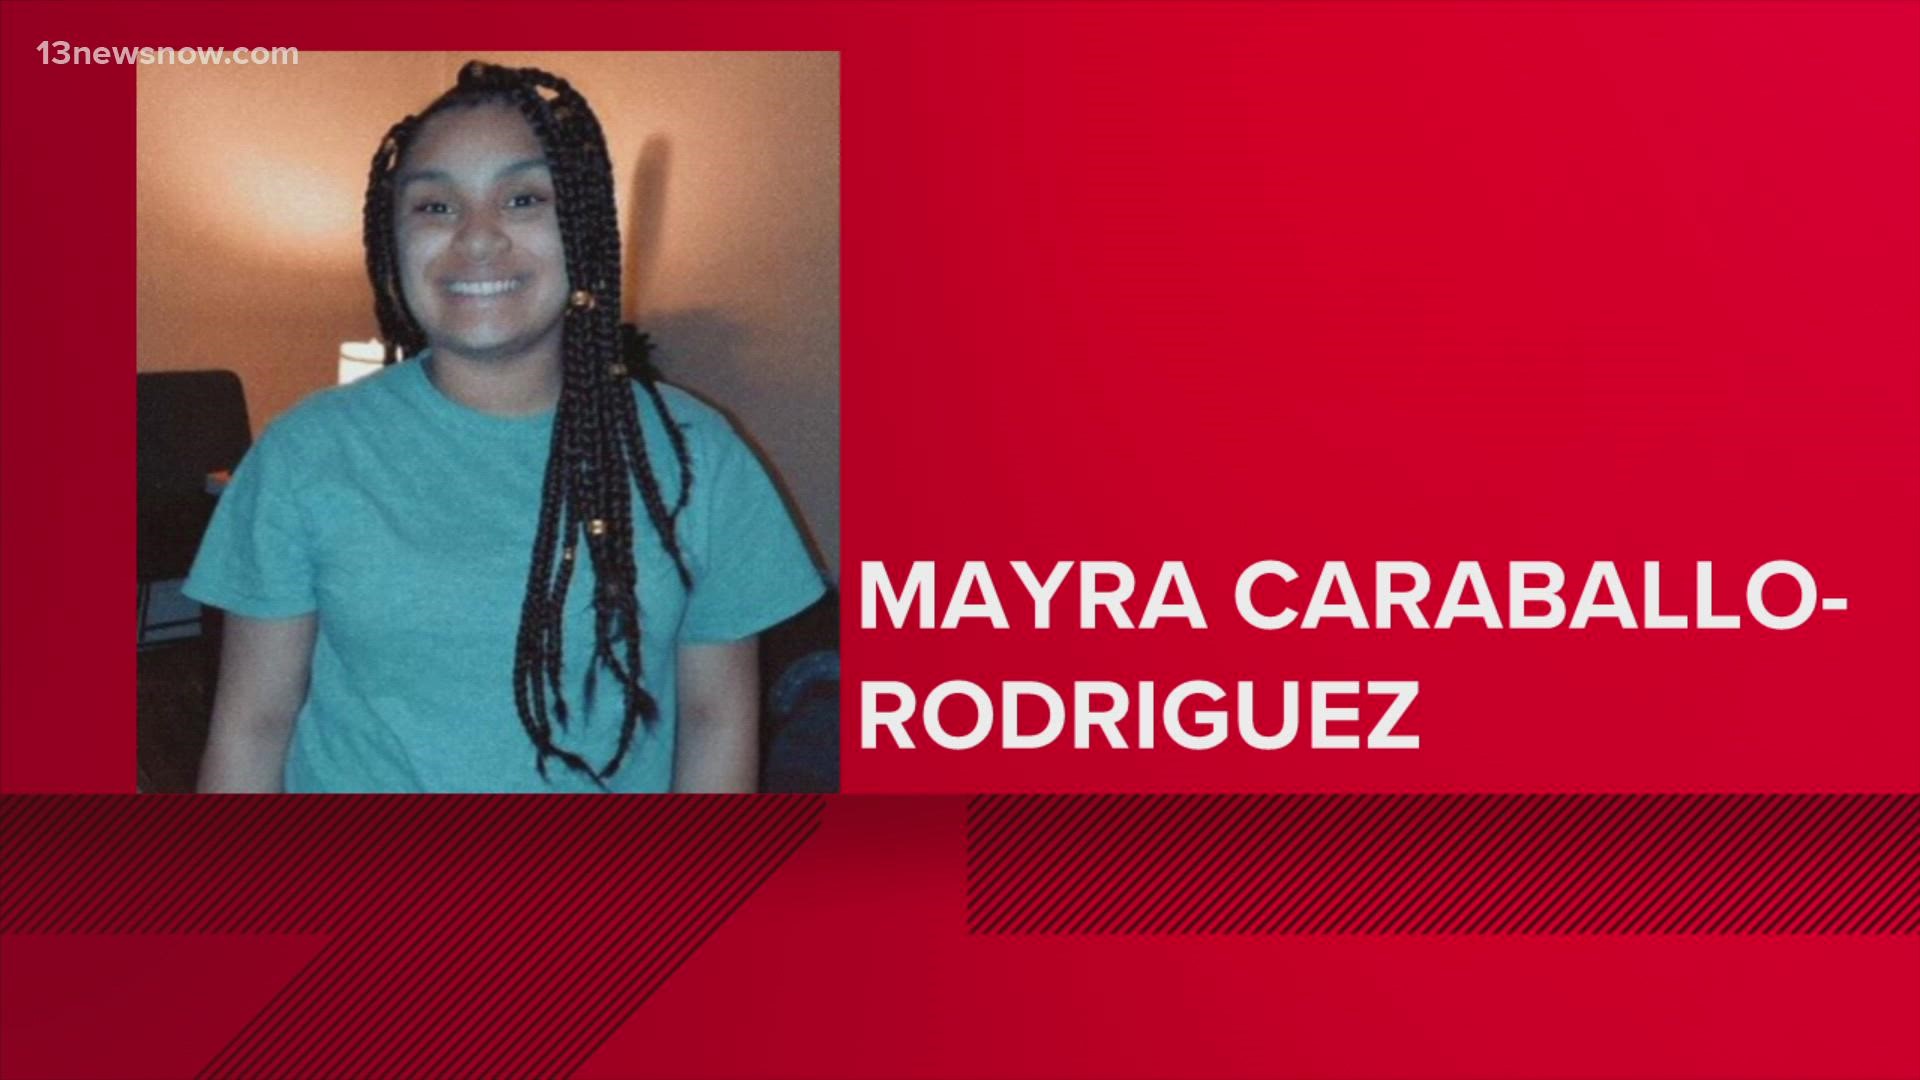 She was last seen near Westover Avenue on Sunday morning.